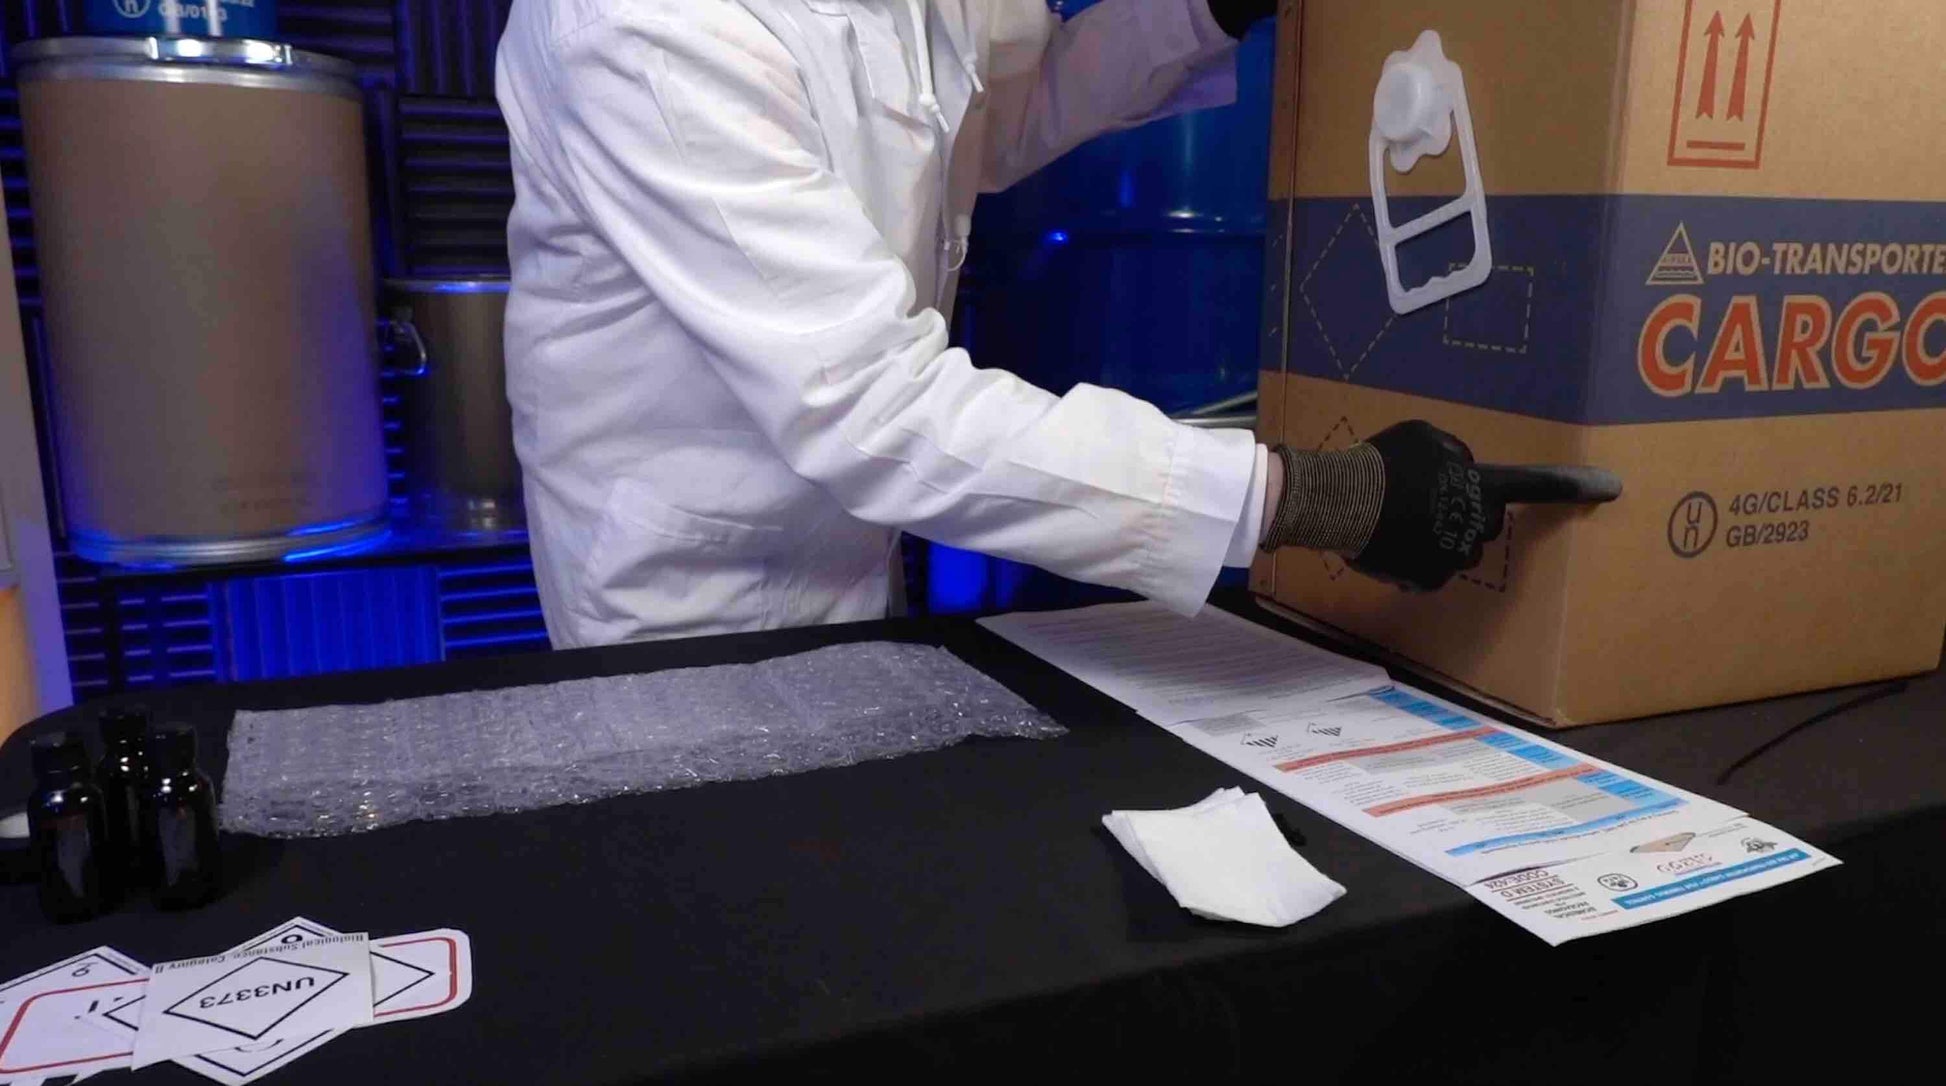 instructor preparing a packaging for UN 3373, UN 2814 or UN 2900 with dry ice